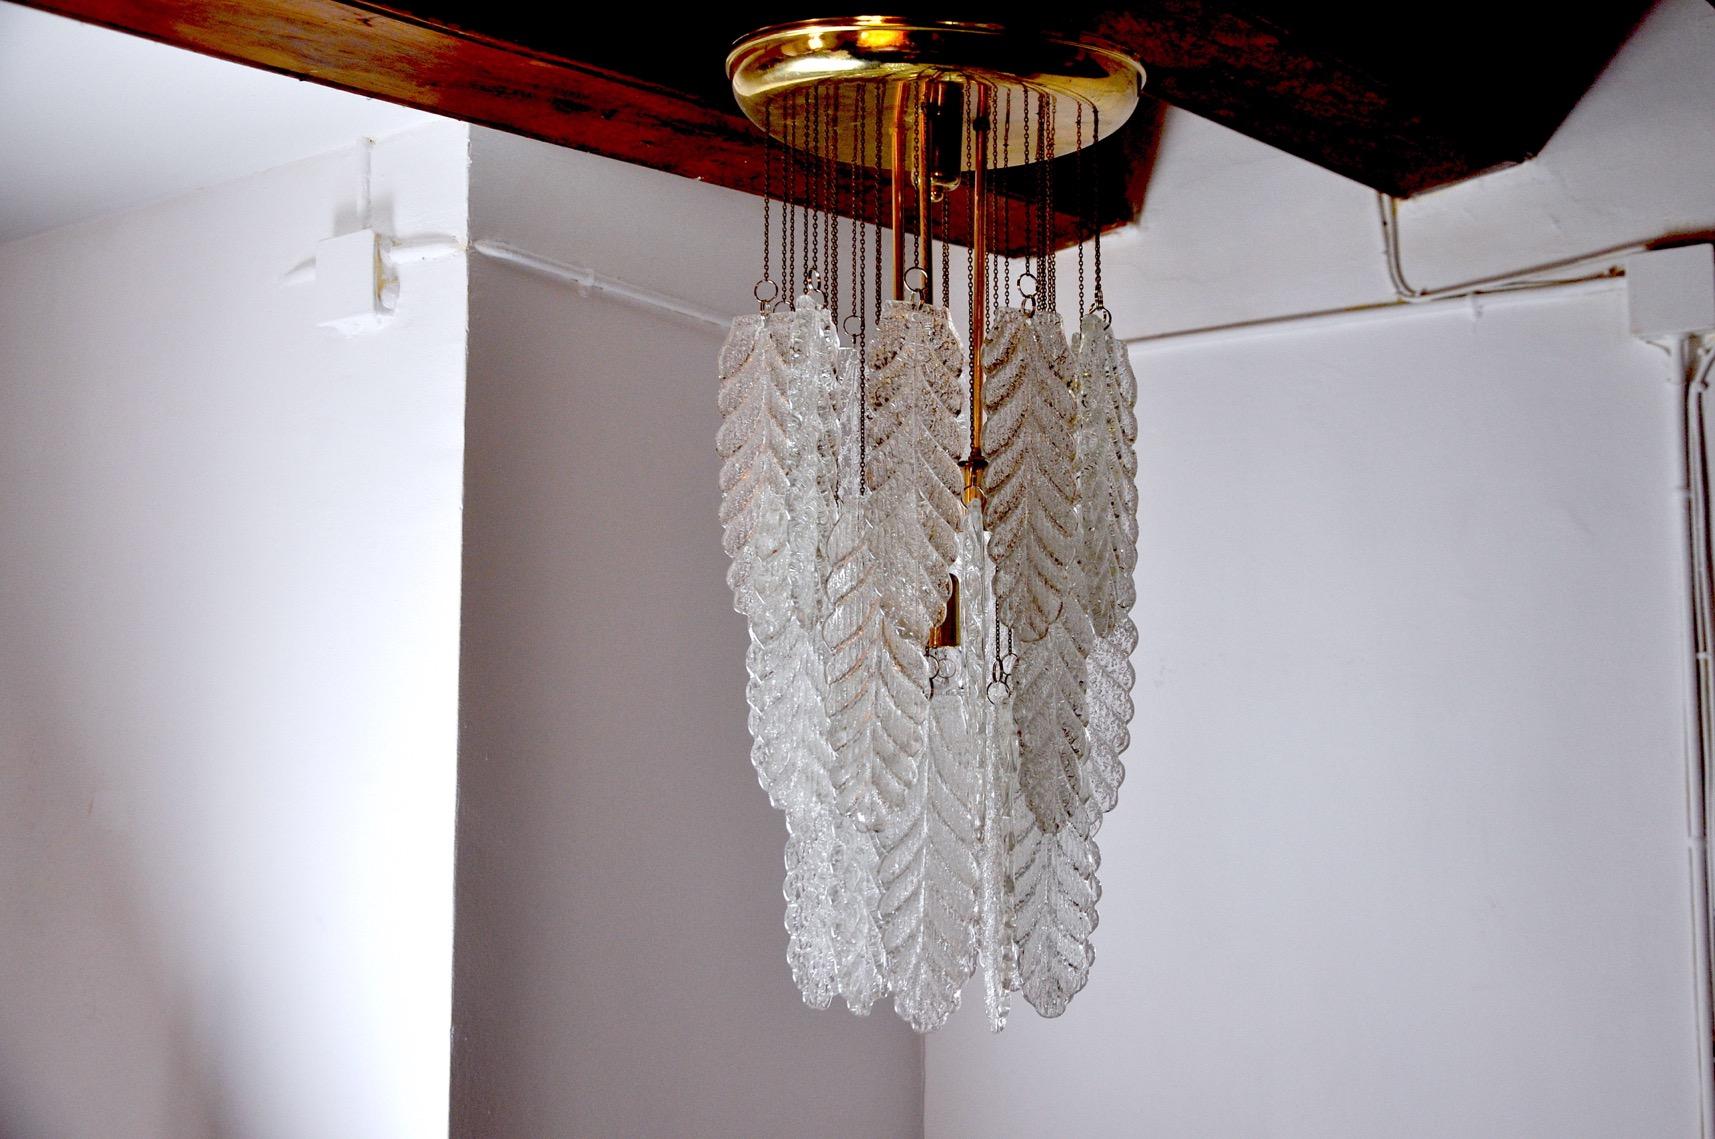 Superb and rare Mazzega pendant lamp designed and produced in Murano, Italy in the 70s. This magnificent chandelier is composed of long sheets of white frosted Murano glass, suspended in a spiral from a gold metal structure. Rare design object that